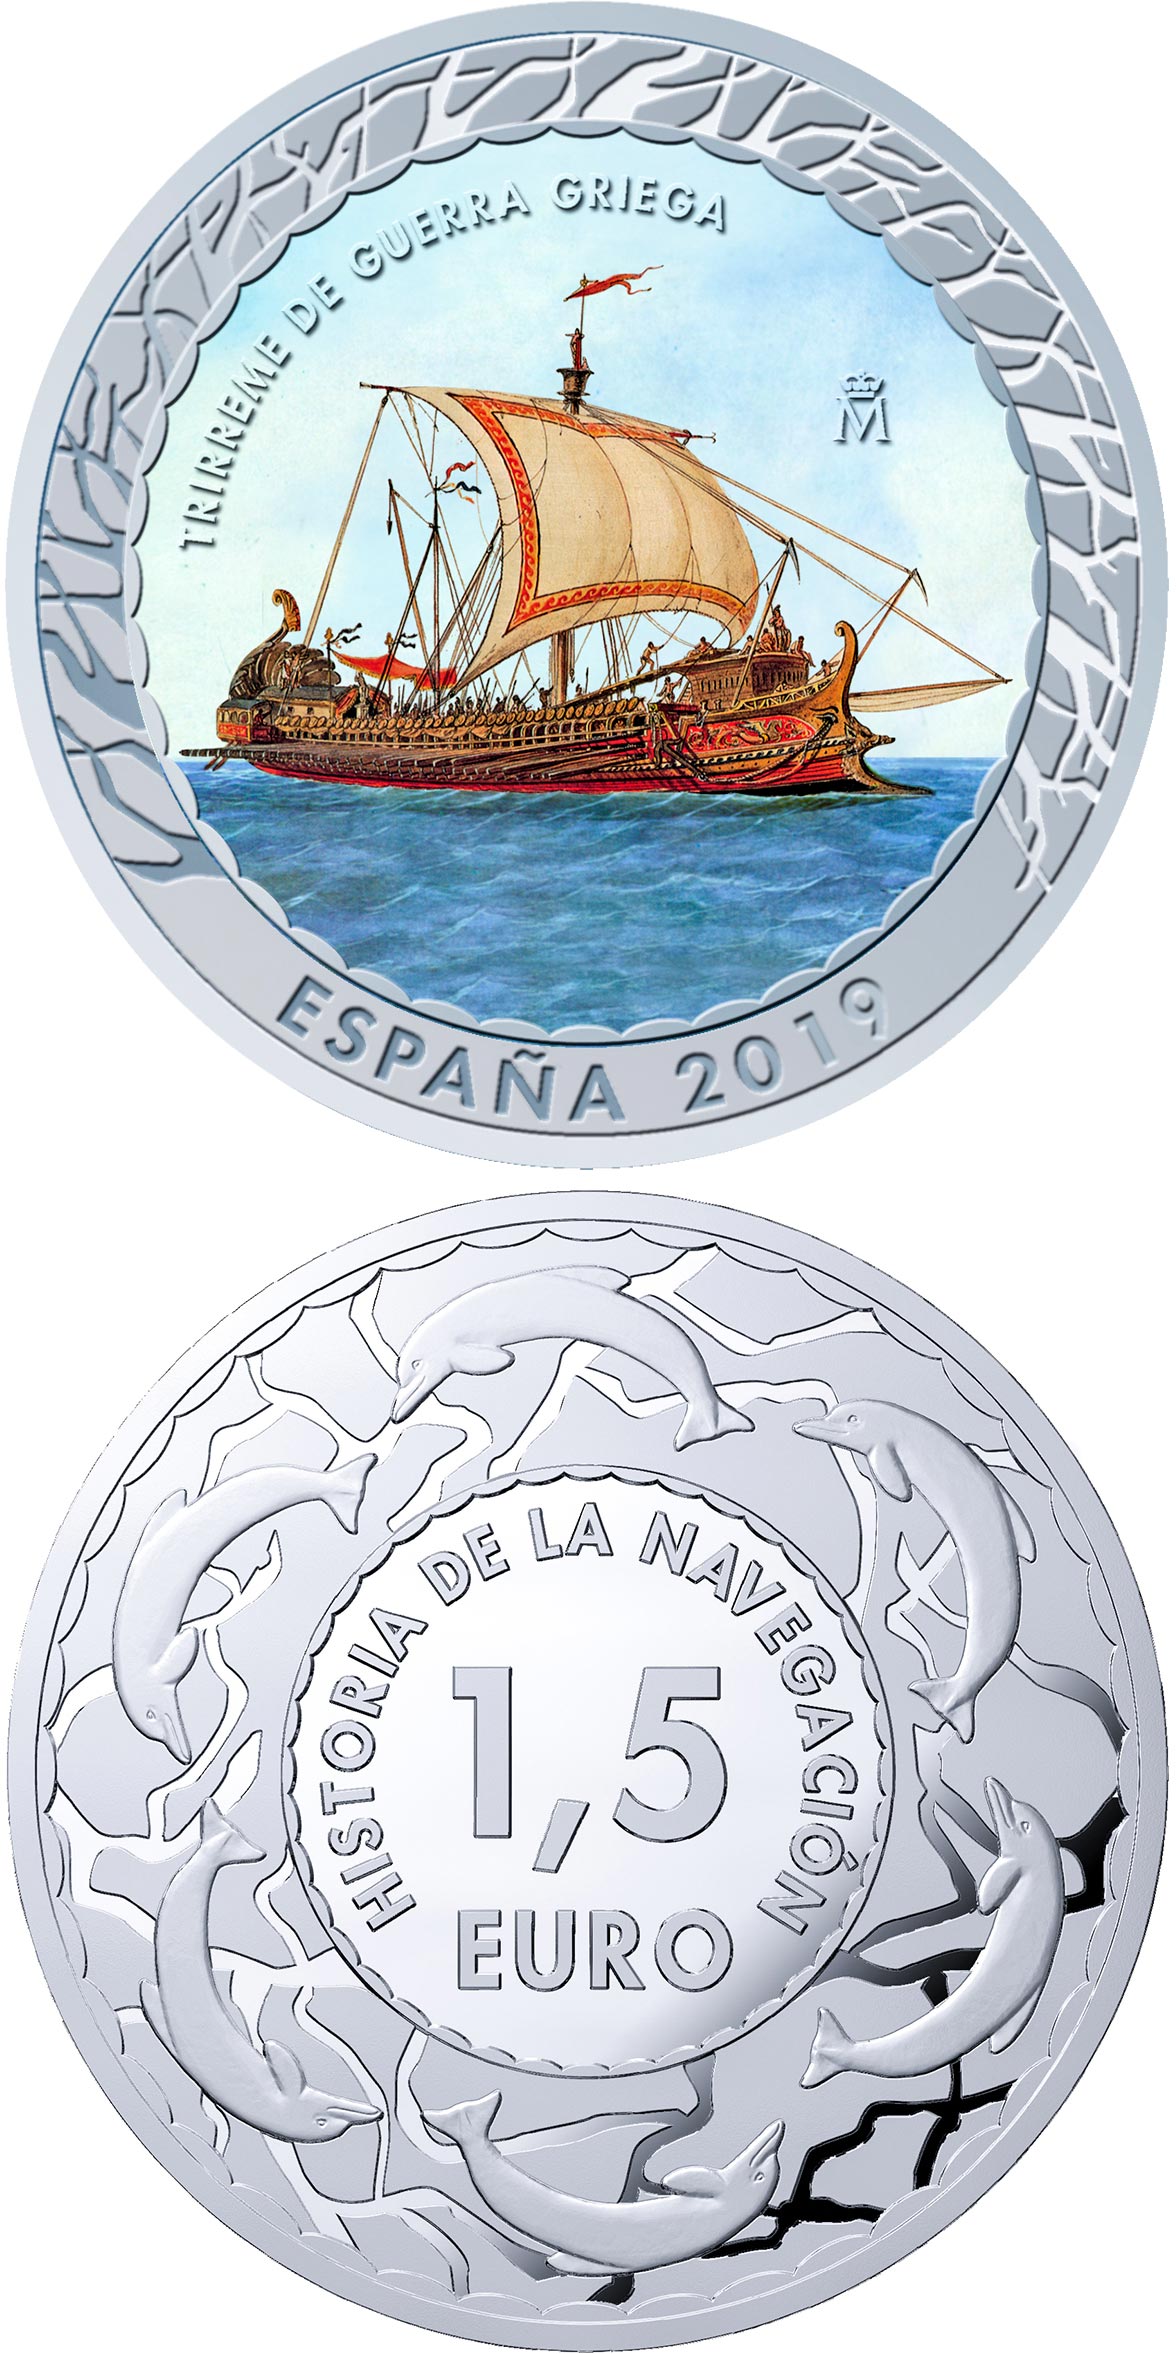 Image of 1.5 euro coin - Greek Trireme | Spain 2019.  The Copper–Nickel (CuNi) coin is of BU quality.